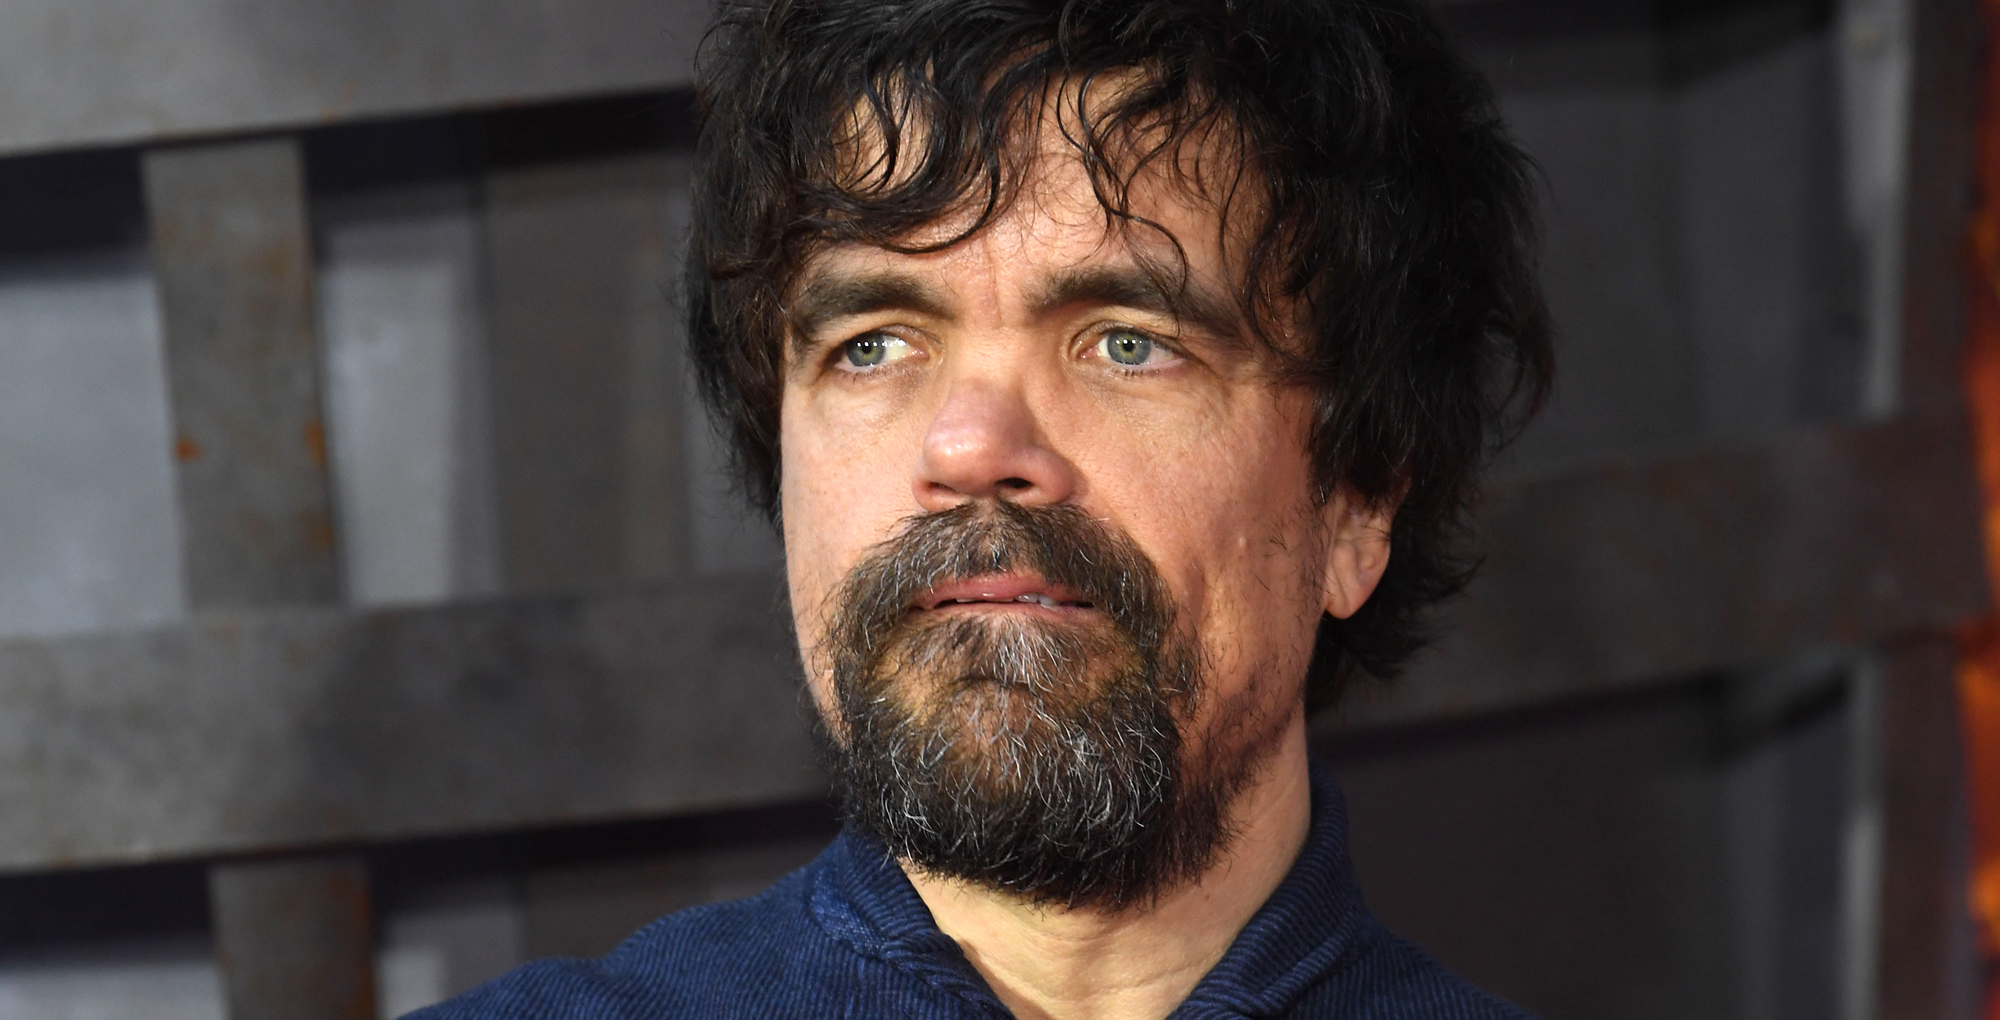 peter dinklage from game of thrones.